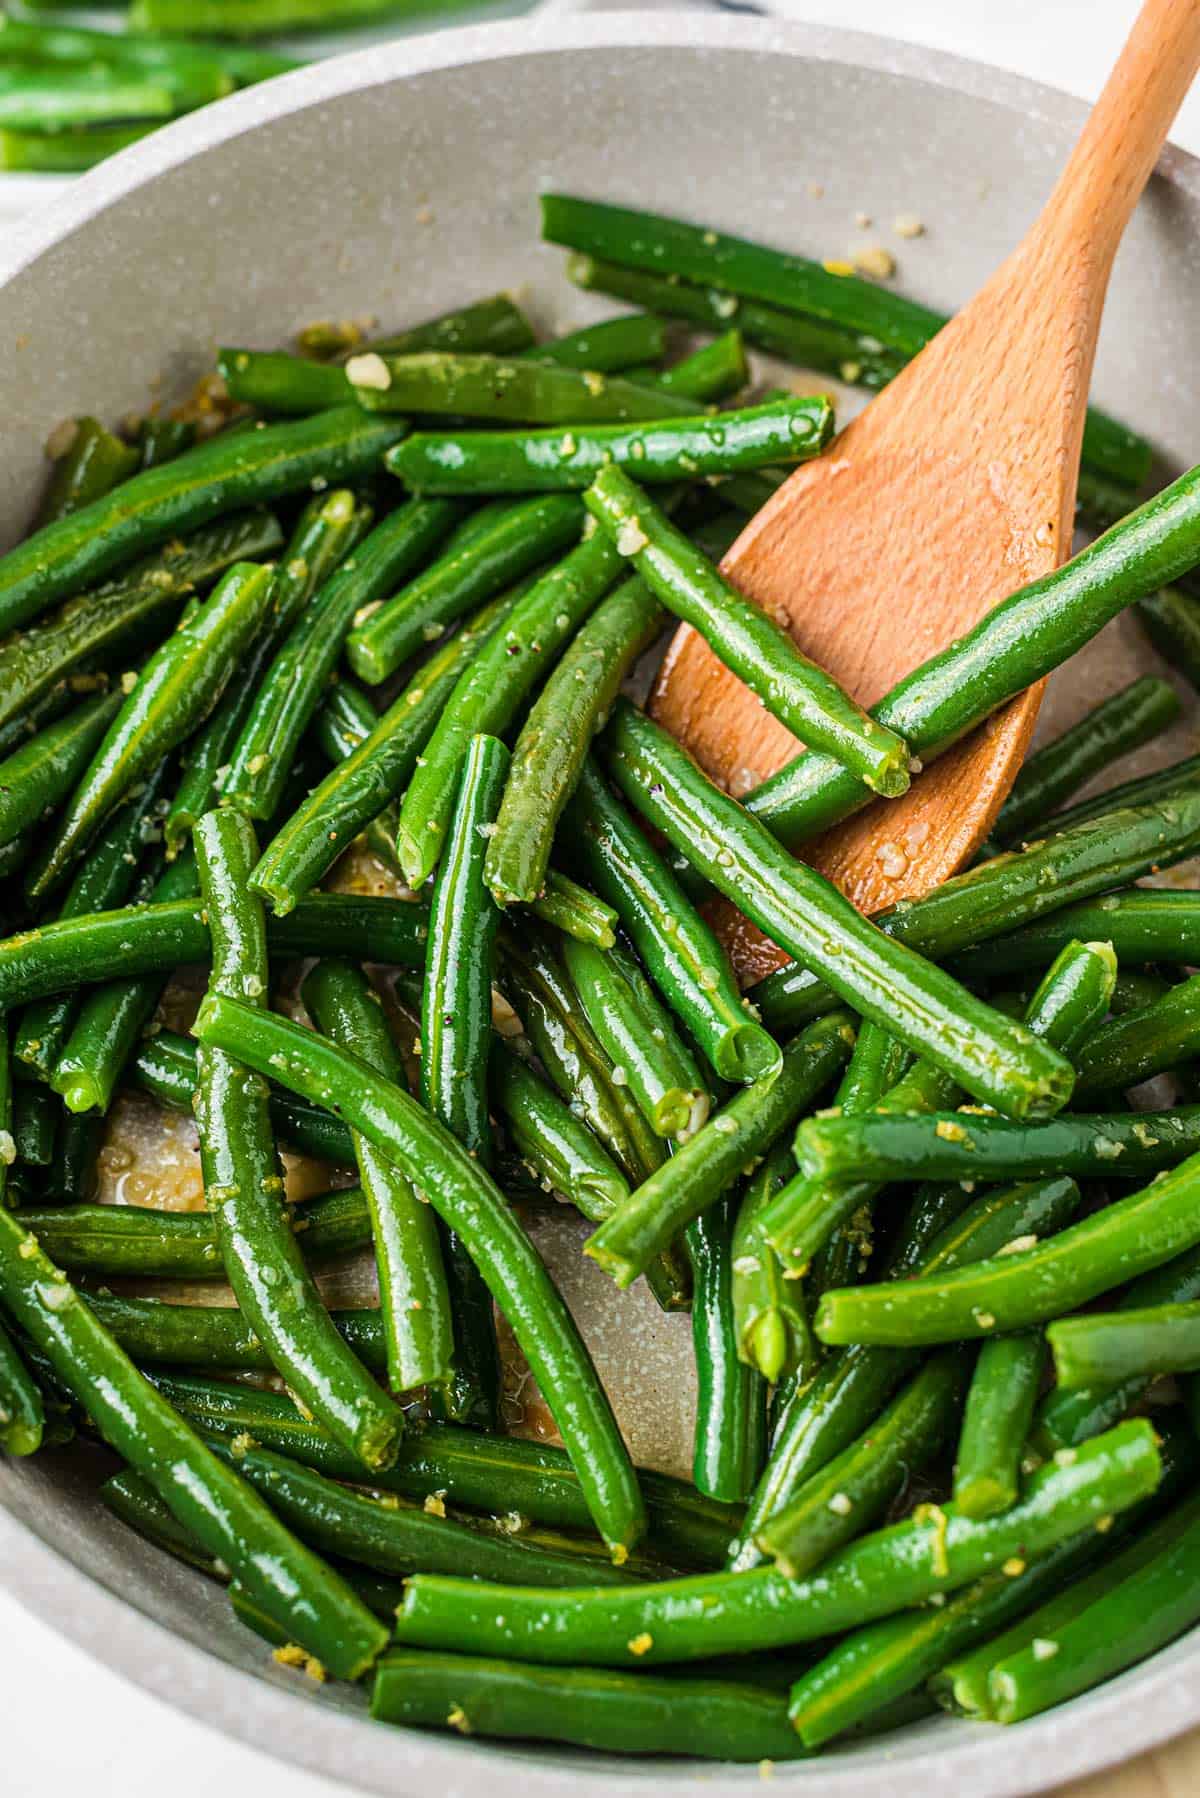 Skillet Green Beans - The Chunky Chef